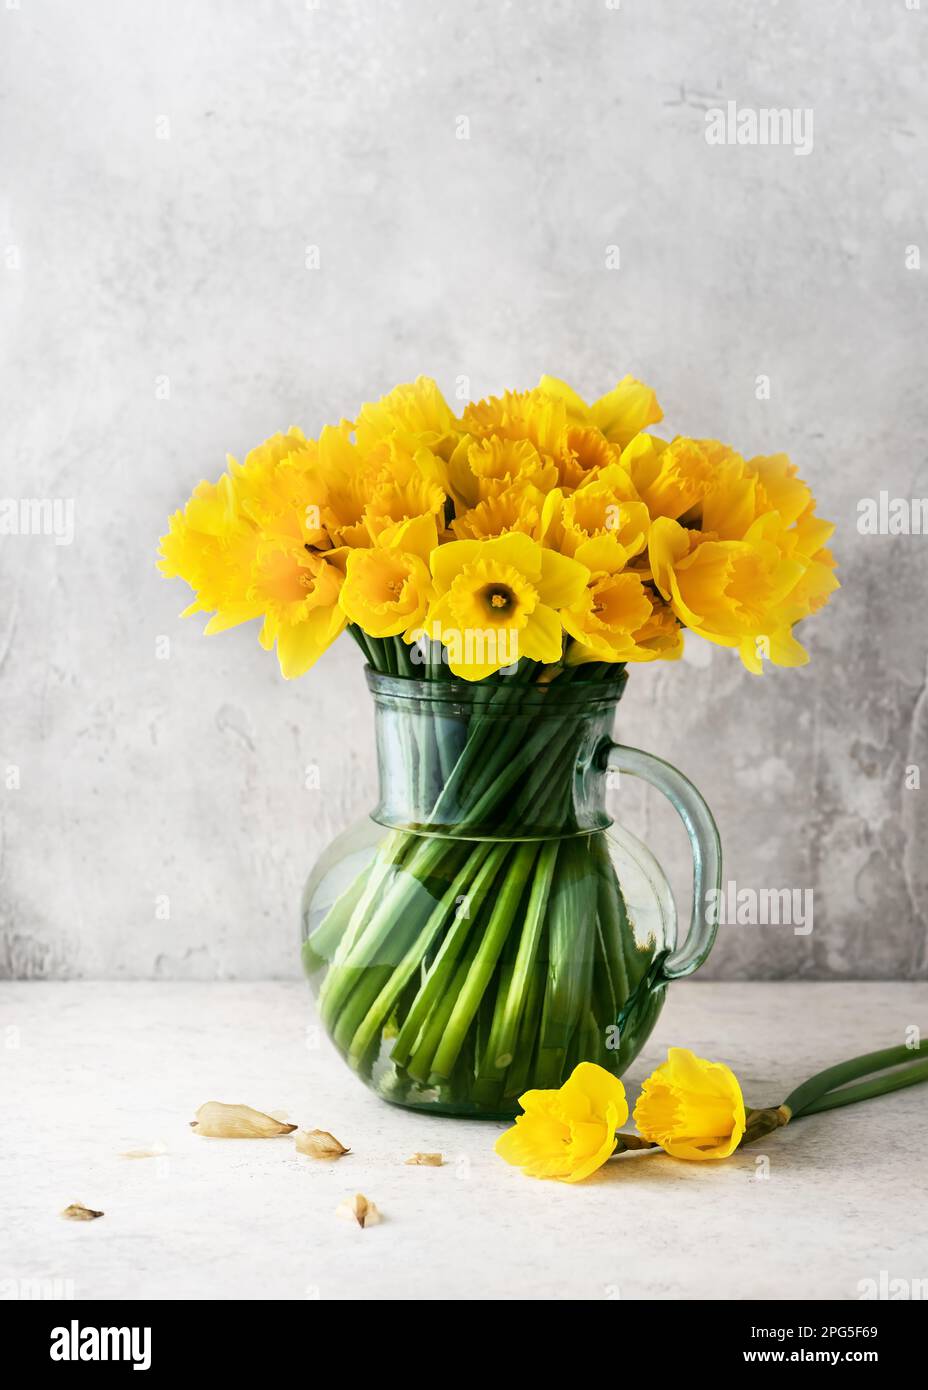 Still life with yellow daffodil flowers in a vintage glass jug. Homemade decoration for Easter or Mothers day. Copy space. Stock Photo